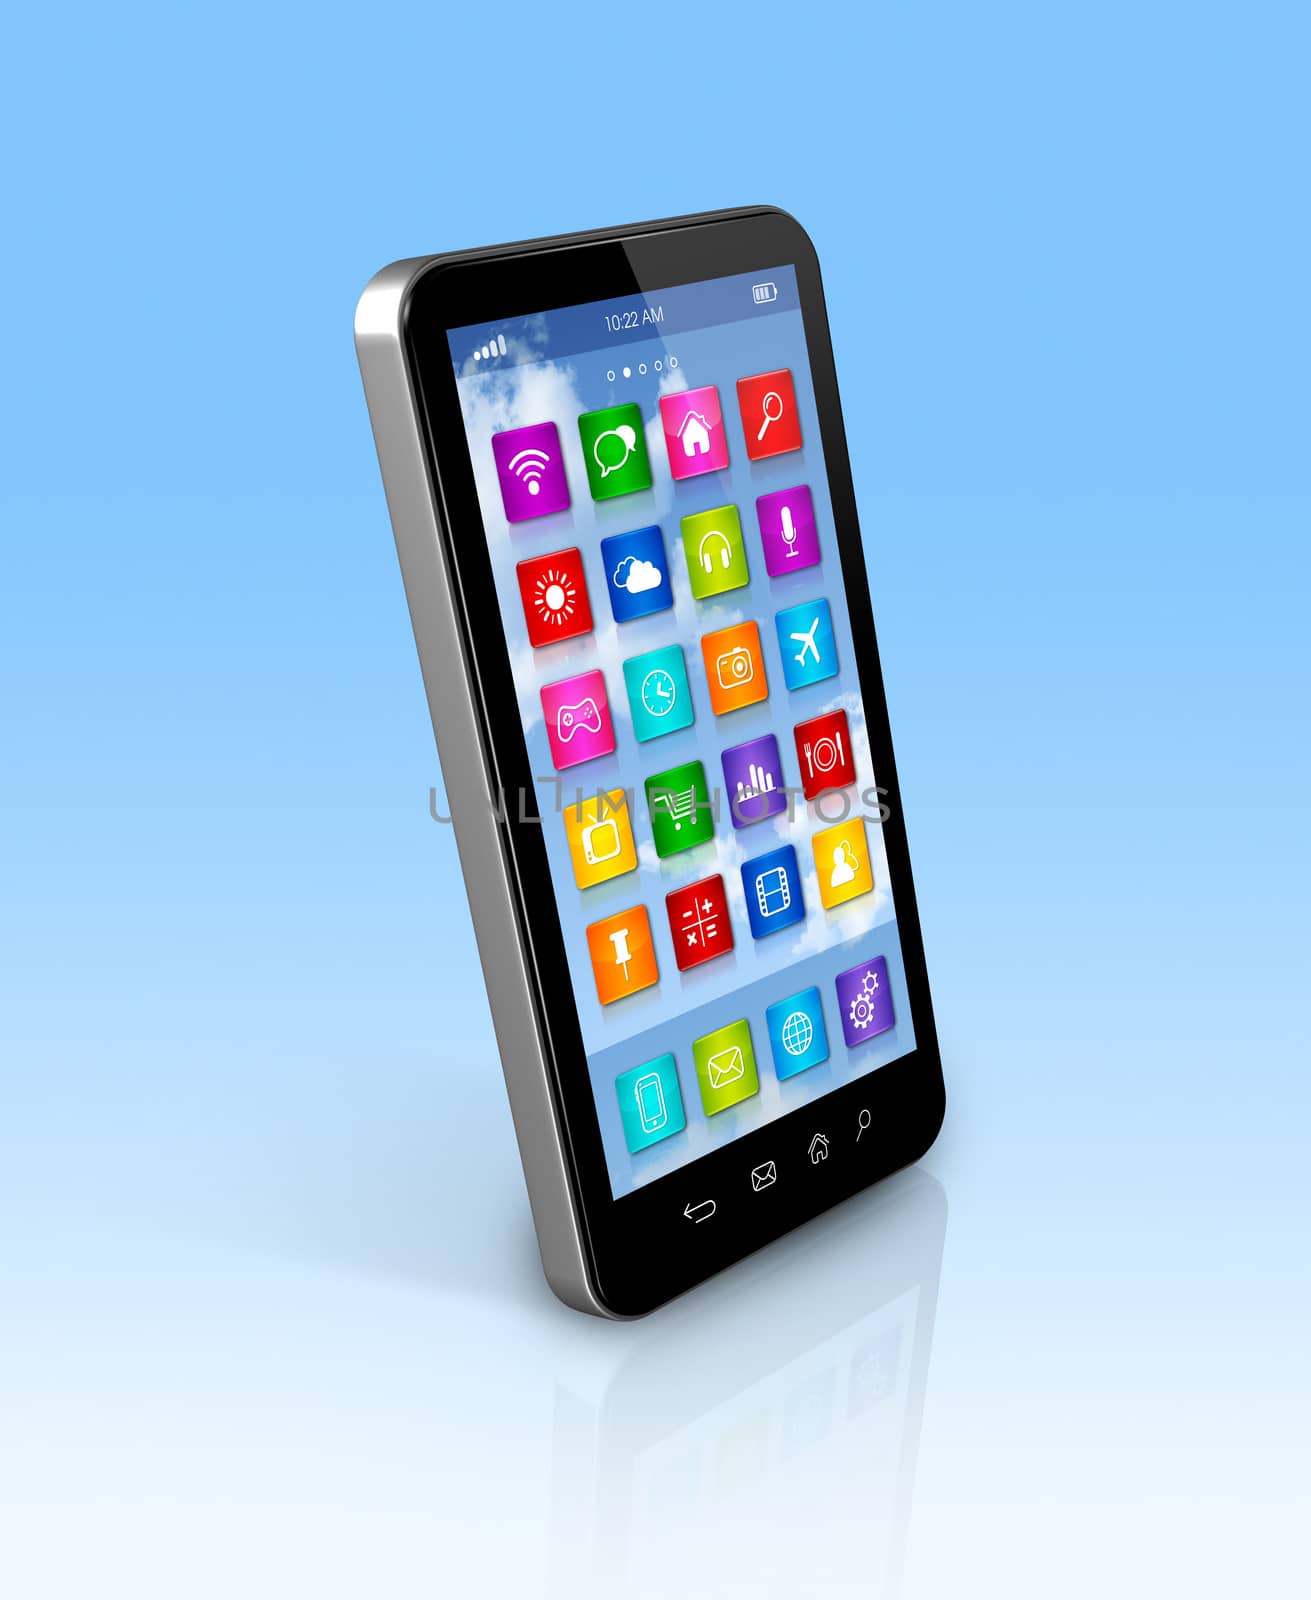 3D smartphone, mobile phone - apps icons interface - isolated with clipping path